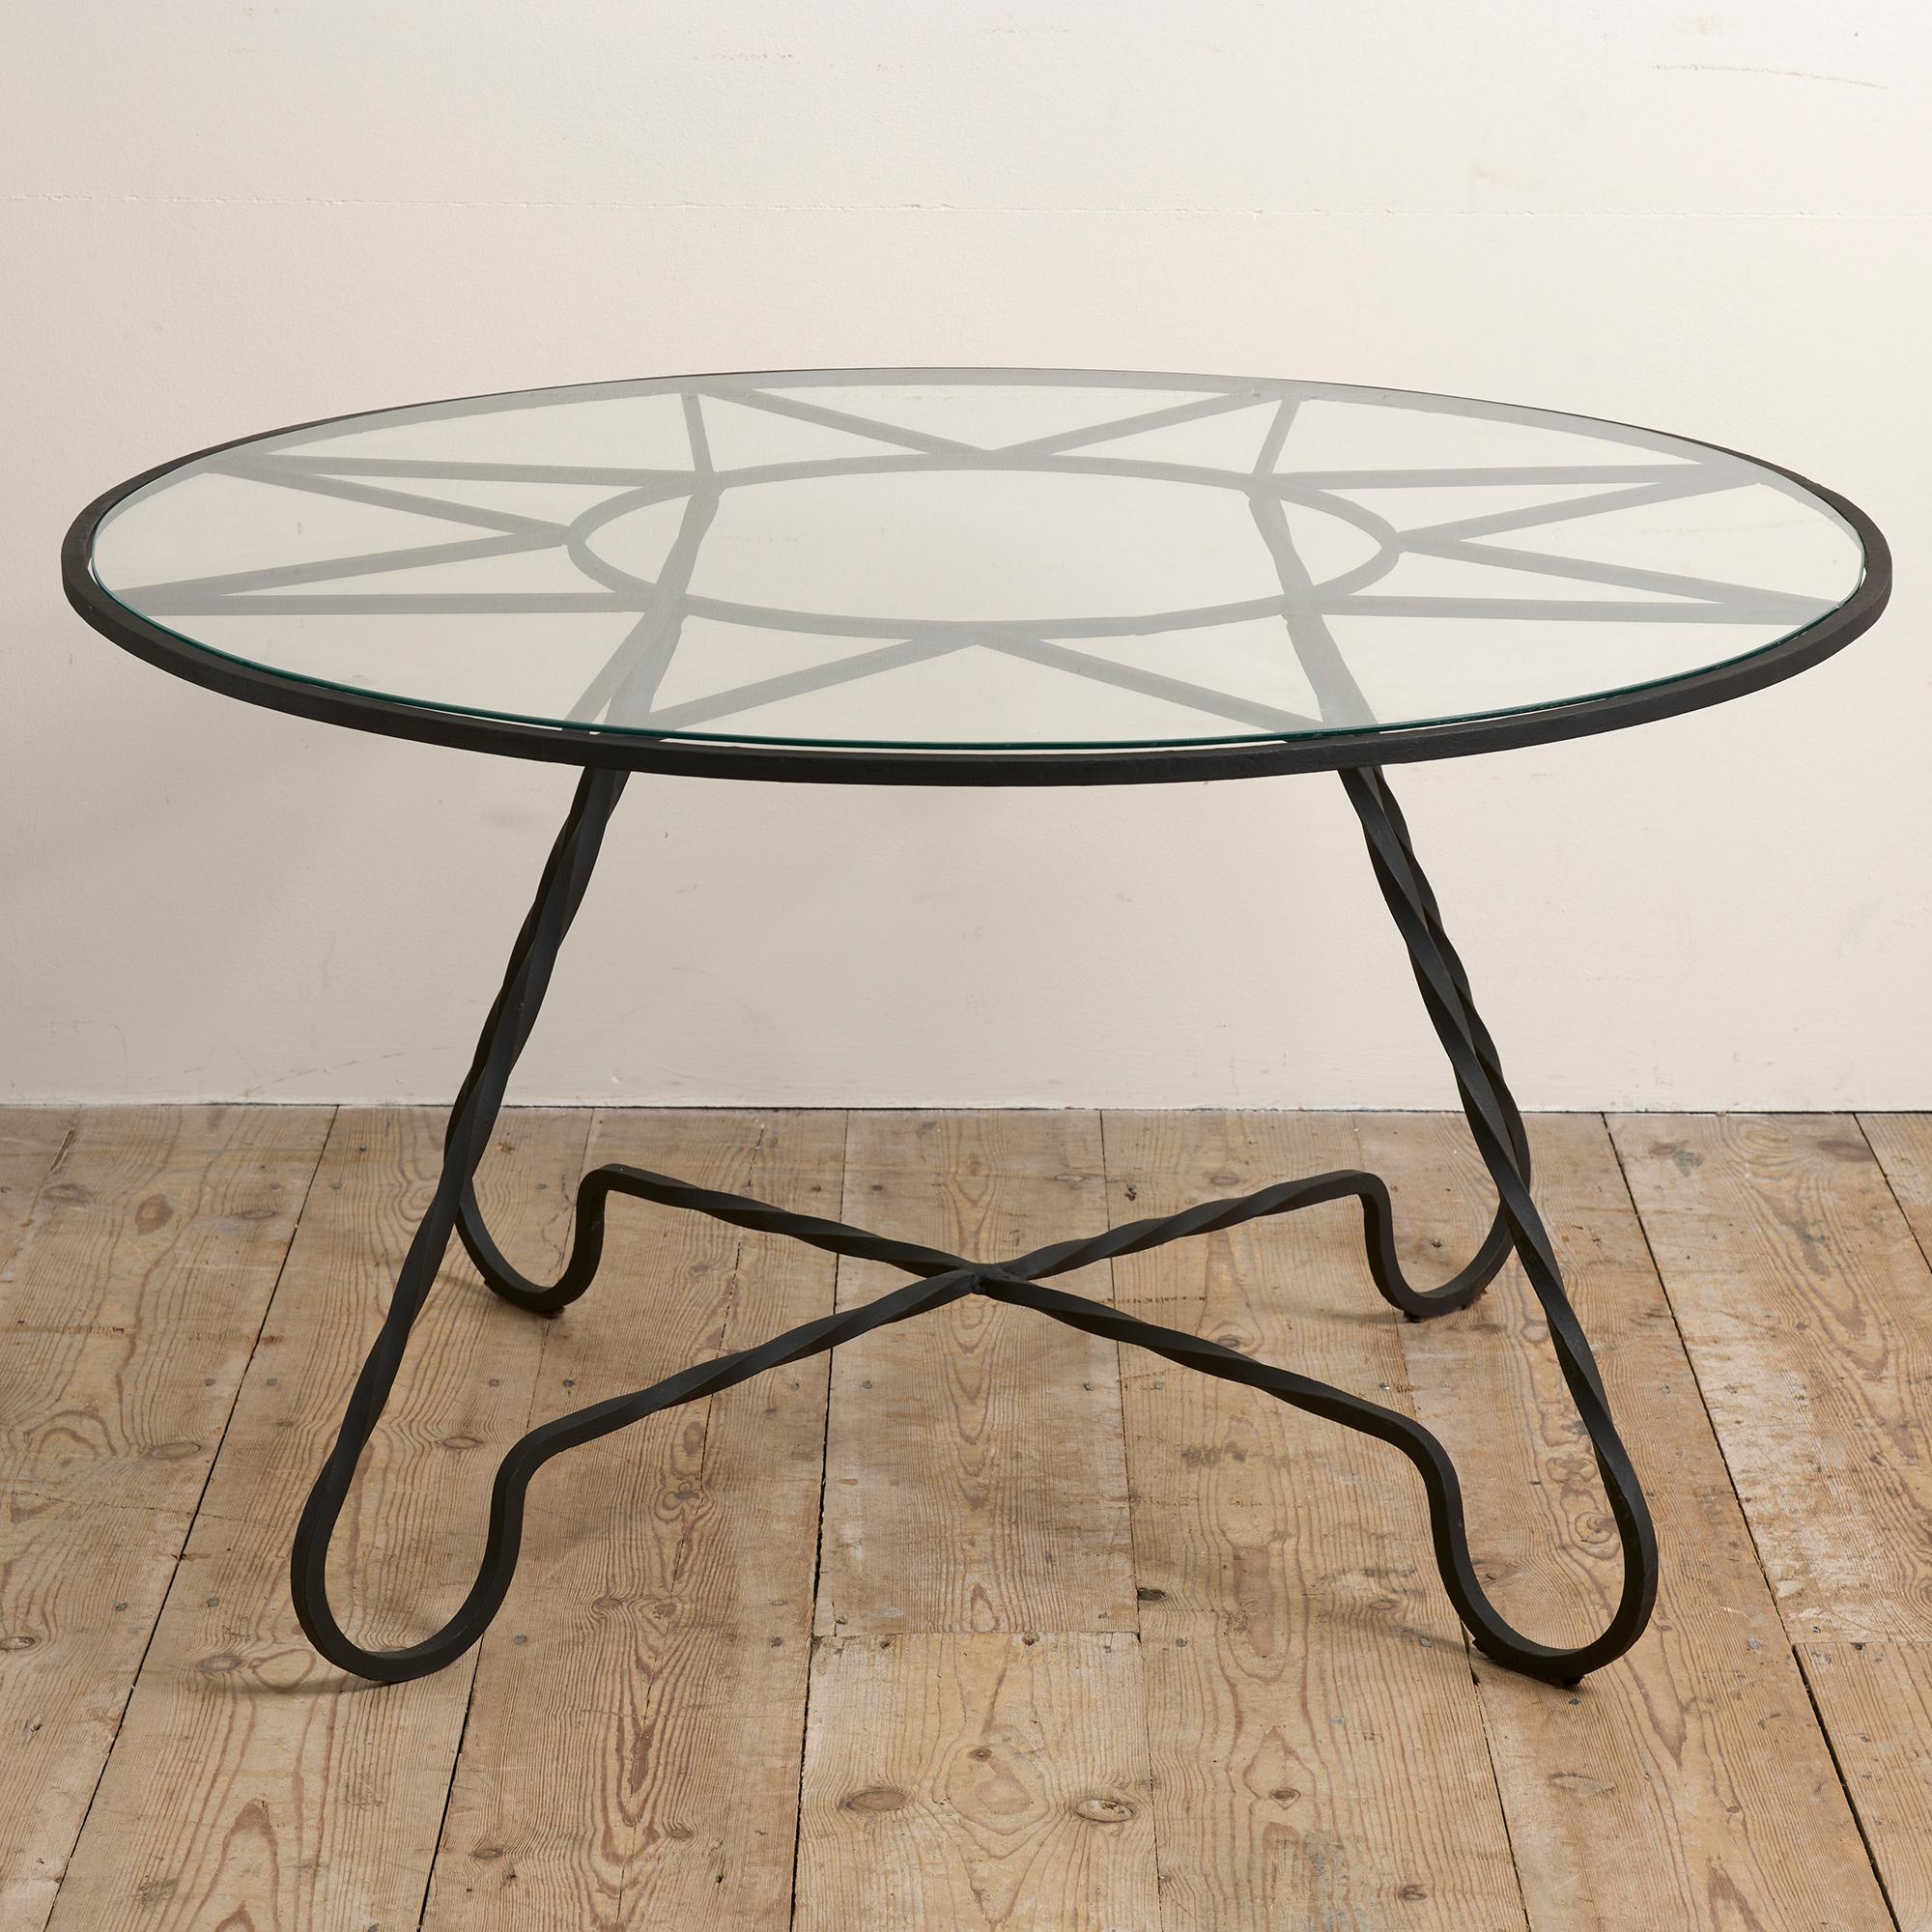 Circular coffee table in black wrought iron with great sunburst / starburst design under the glass top. Stylish crossed base. This table is very reminiscent of the work of Jean Royere who was one of the leading designers in post-war France, he